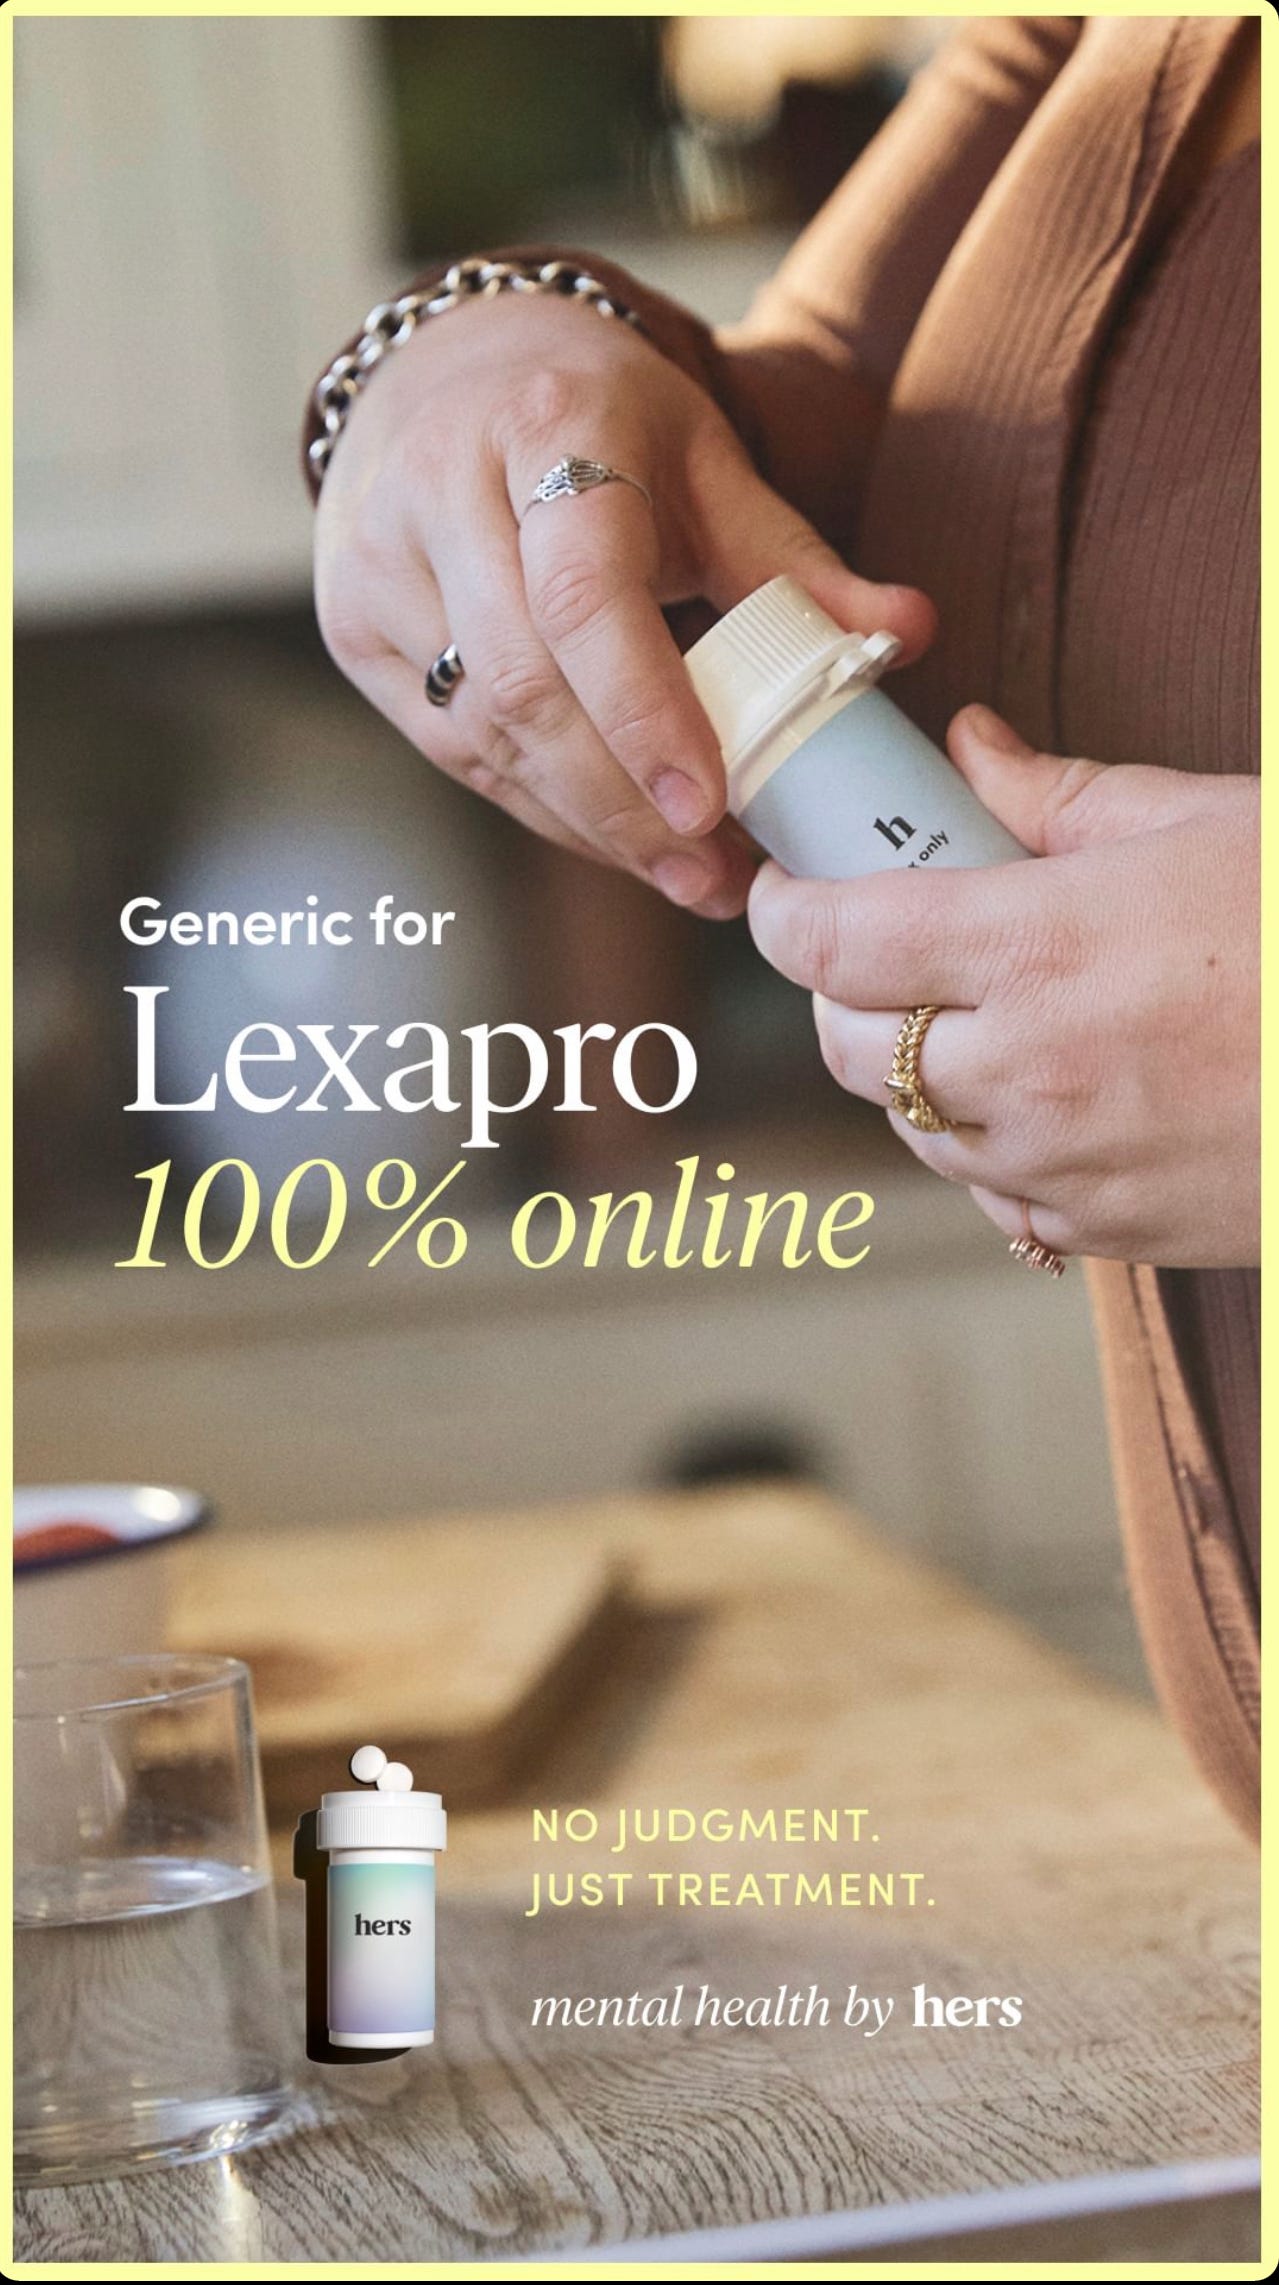 screenshot of a Hers ad that says Lexapro, 100% online, no judgement just treatment